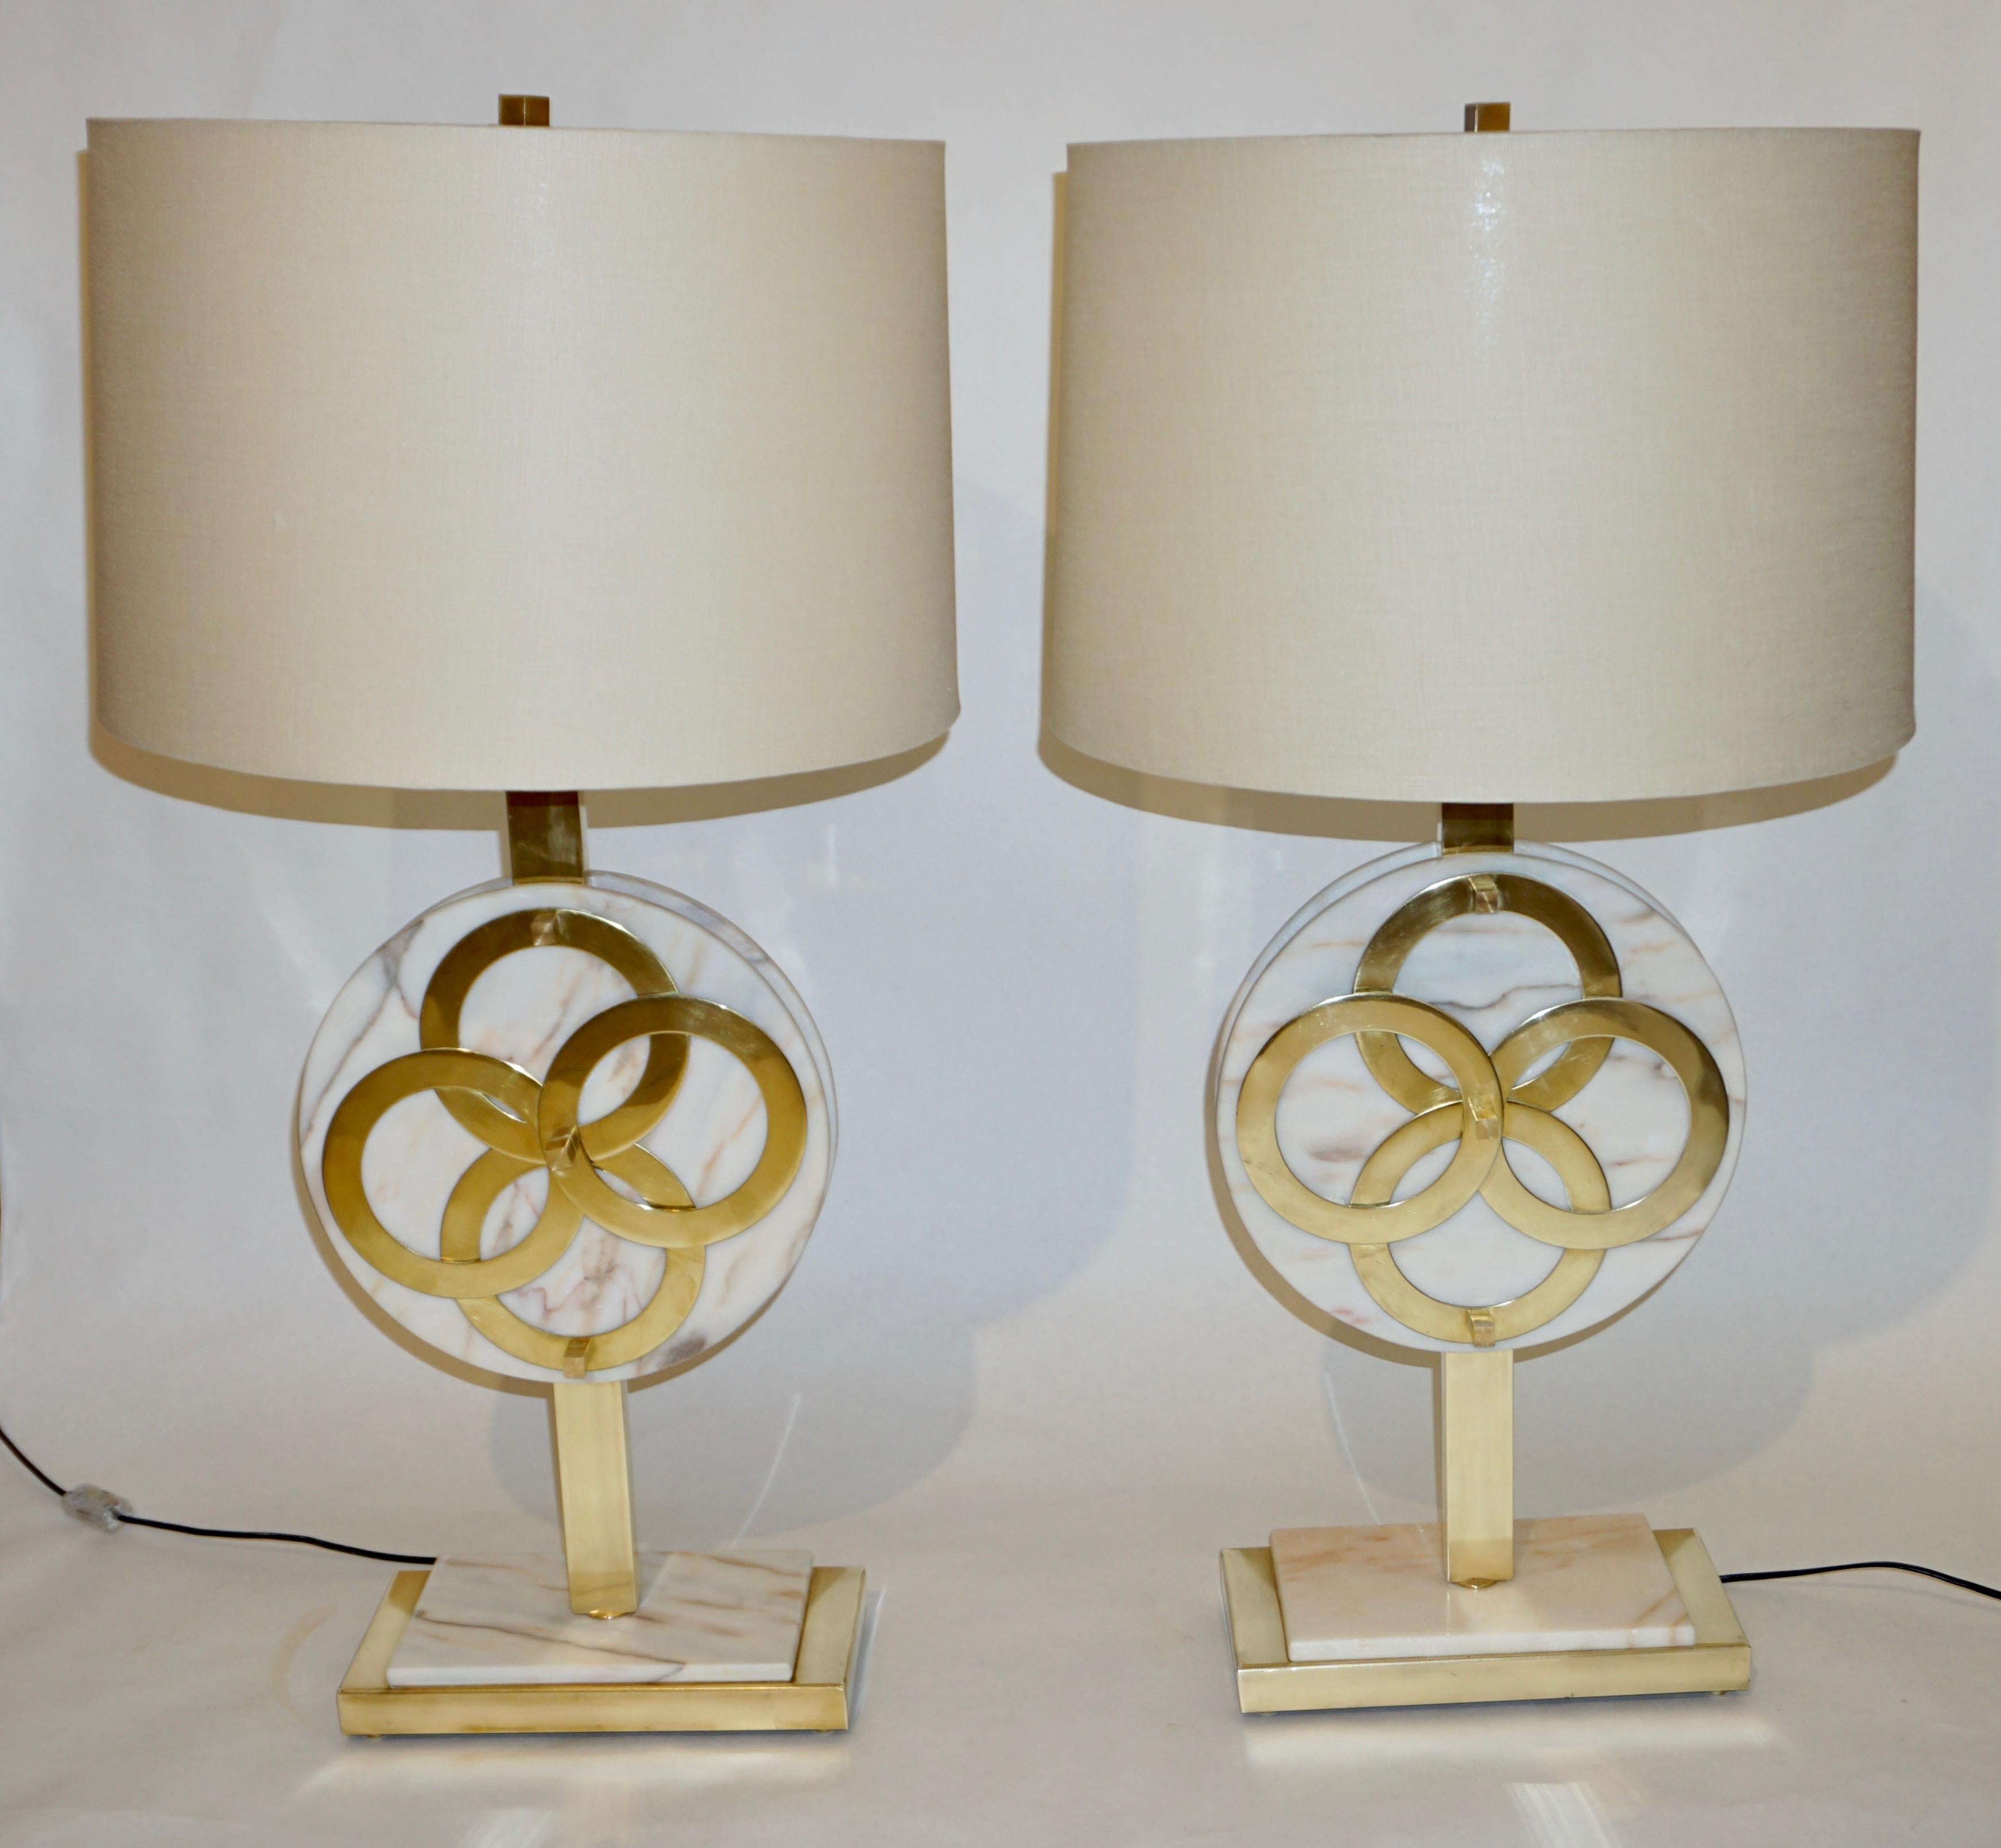 Mid-20th century Italian pair of table lamps, unique geometric design, entirely handcrafted in brass and pink Carrara marble, the body consisting of two hand polished marble discs, embracing a brass pole and decorated on one side with two brass